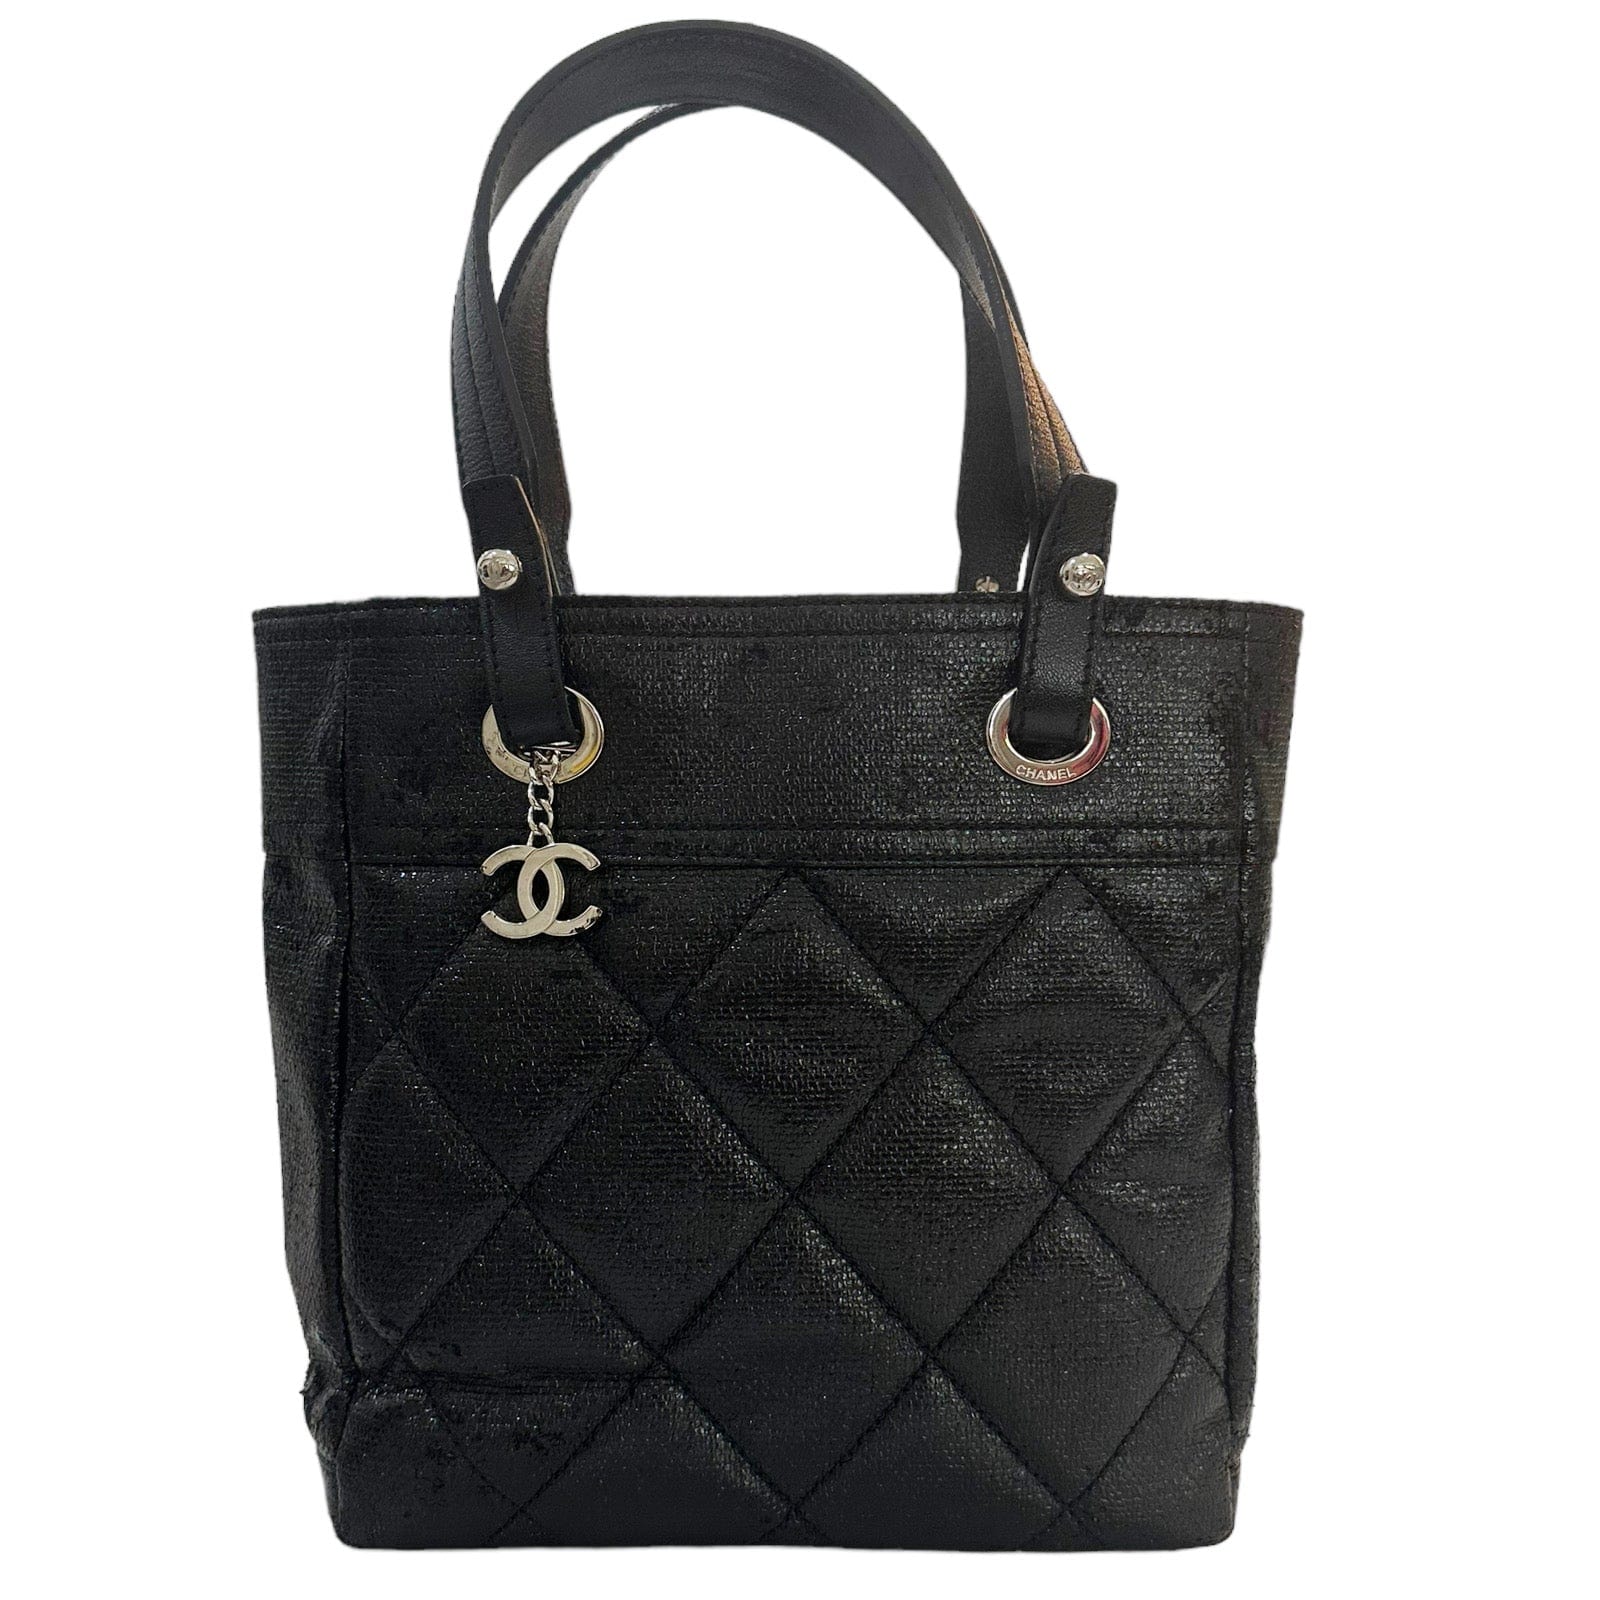 chanel shopping bag leather black